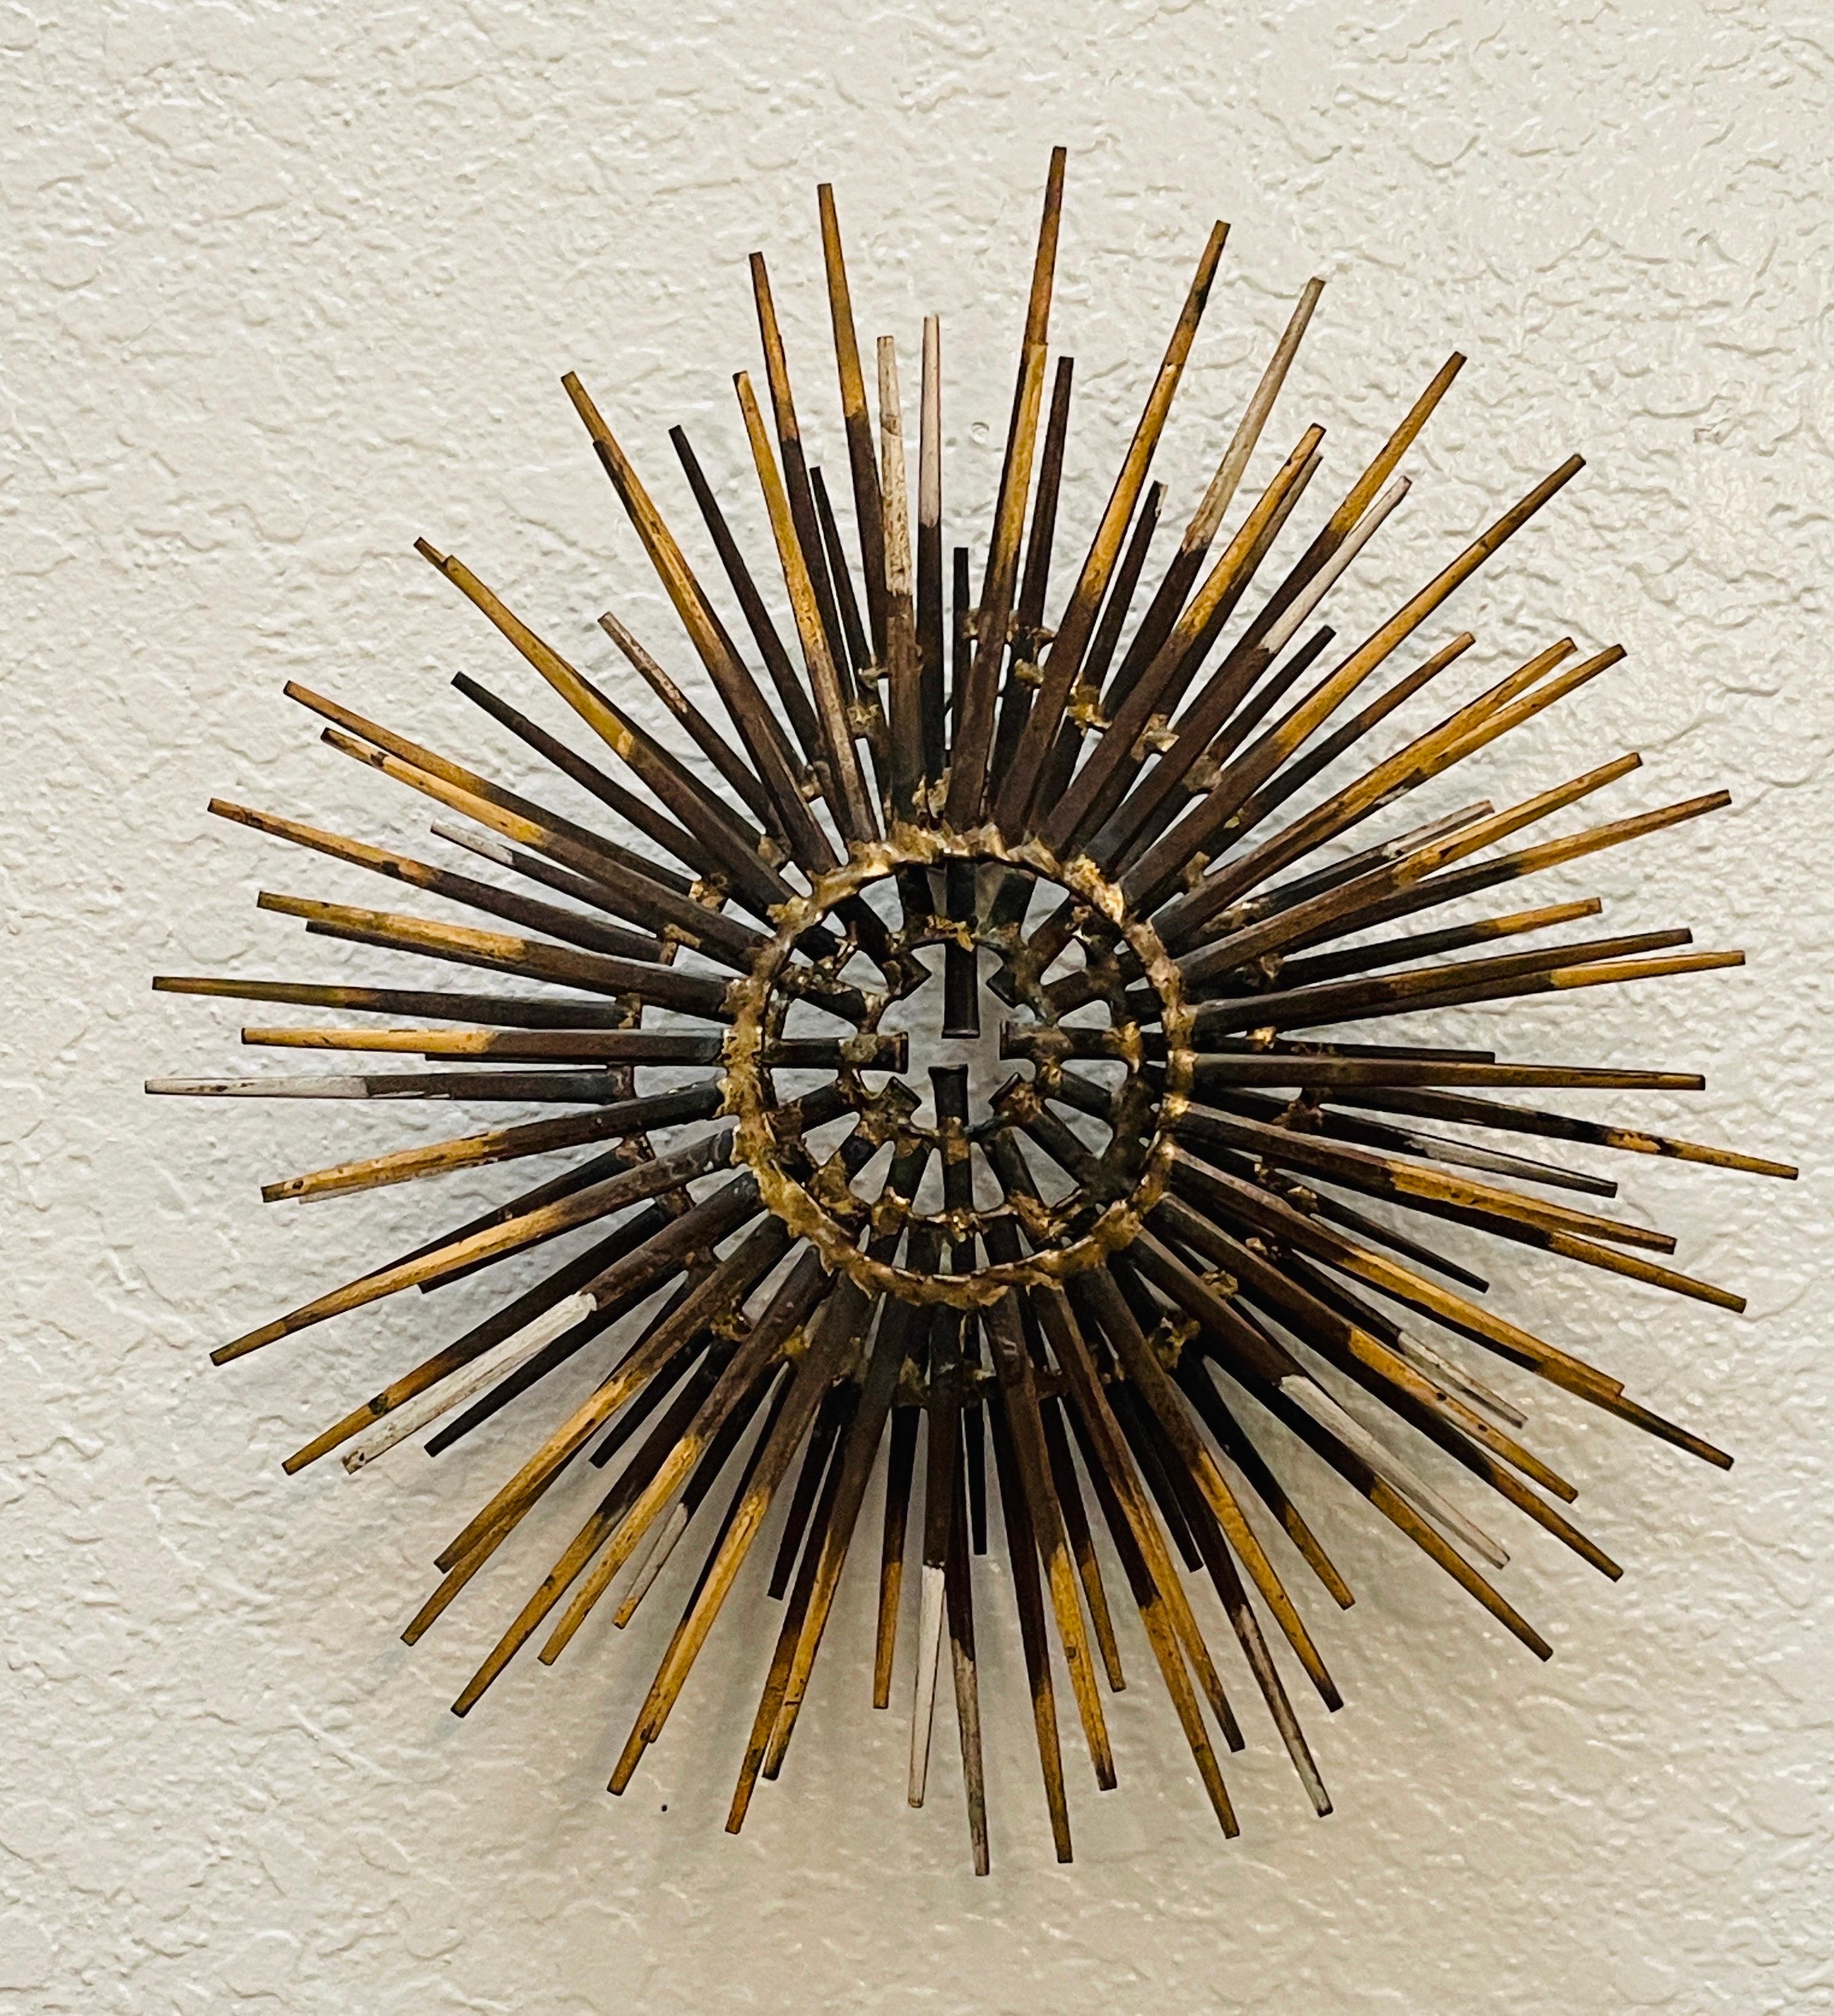 20th Century Diminutive Gilt Iron Two-Tier Sunburst Wall Sculpture by William Bowie For Sale